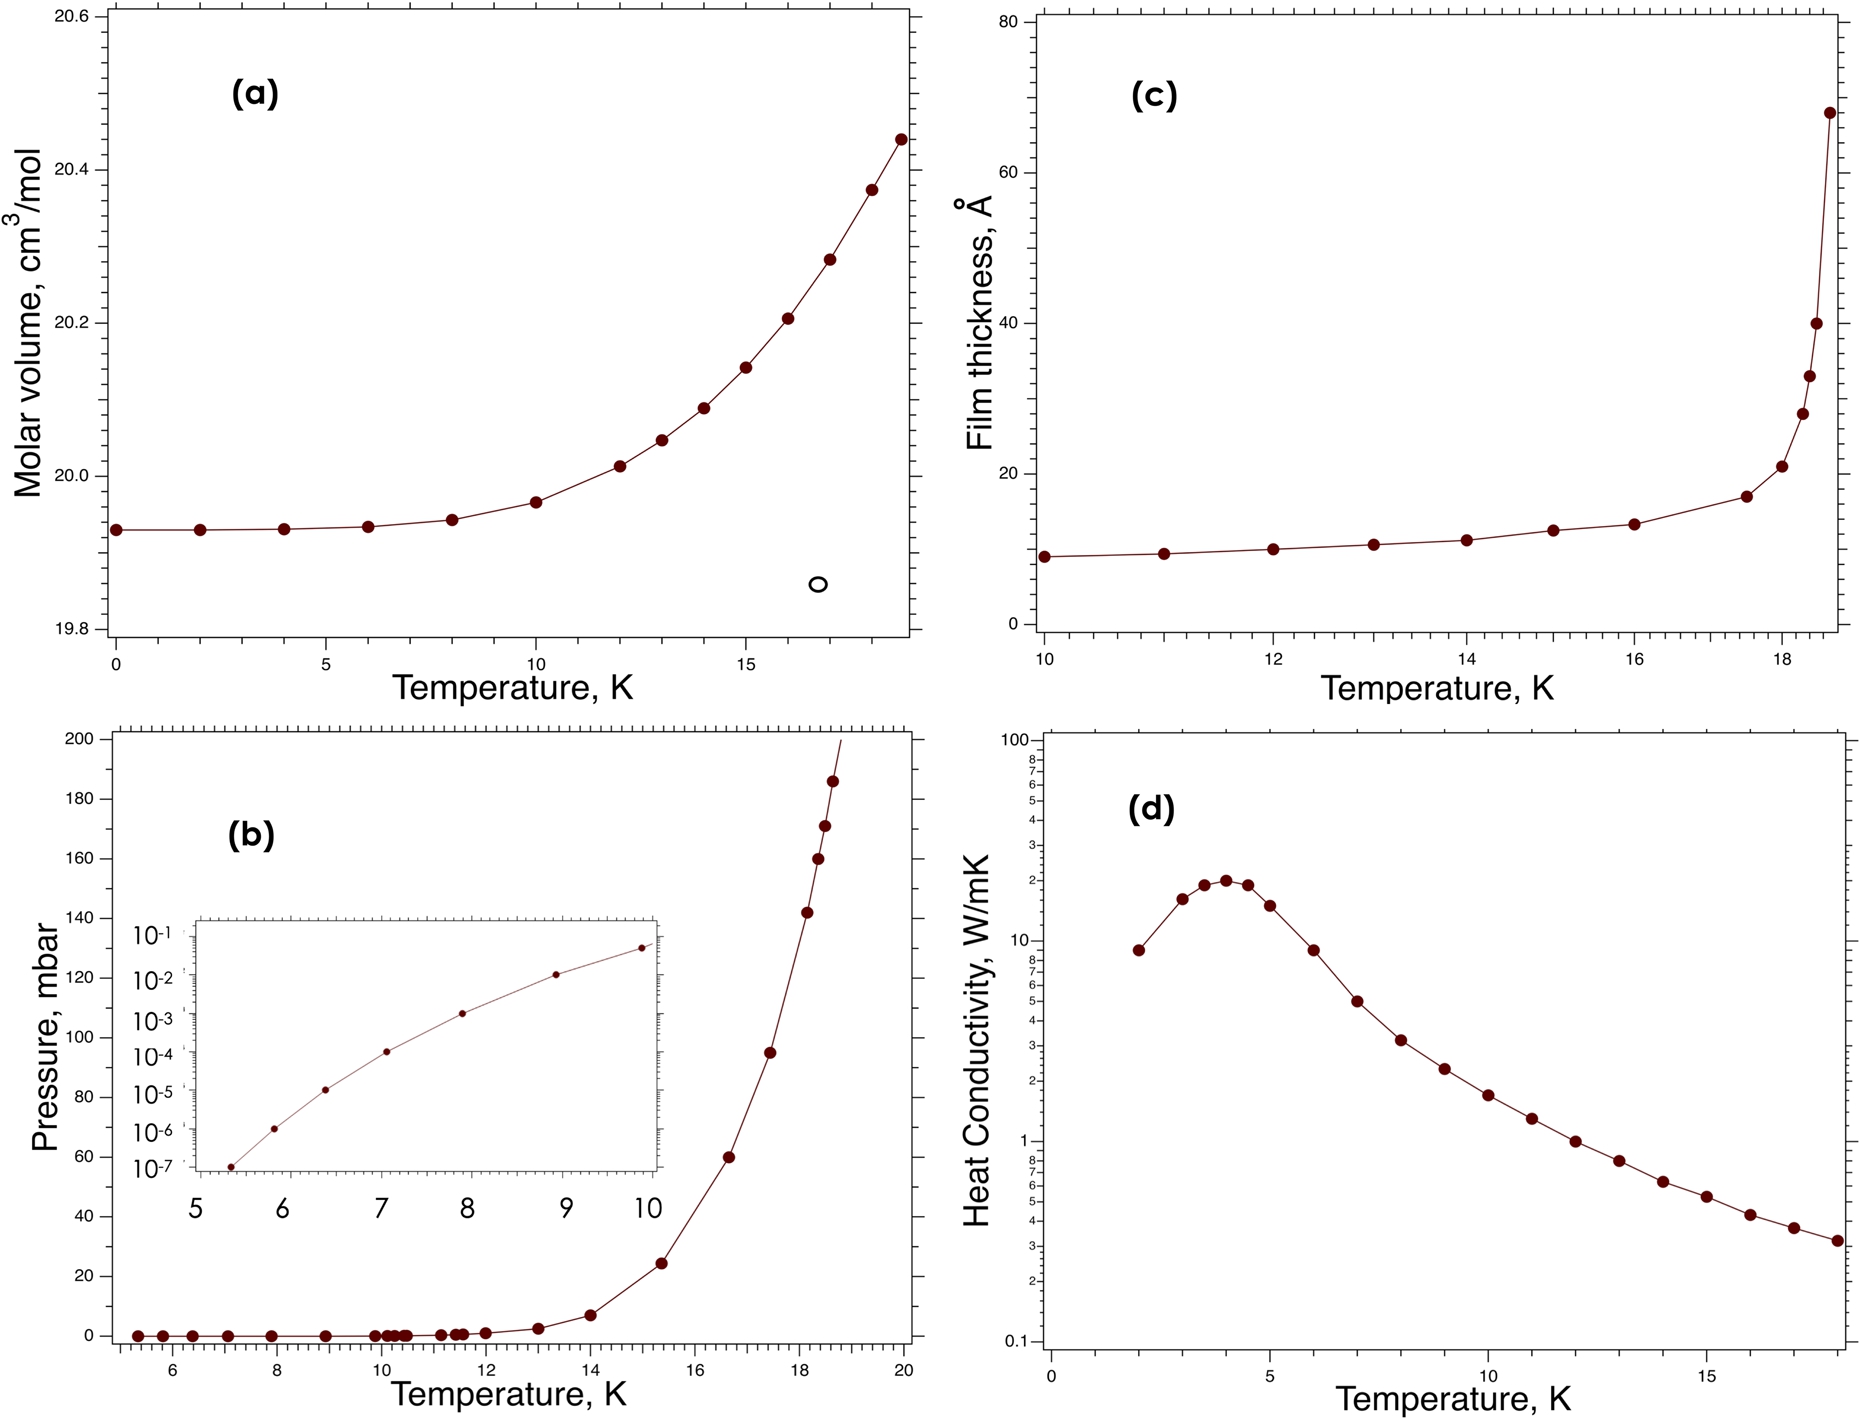 Temperature dependent properties of solid deuterium below the triple point: (a) – molar volume; (b) – saturated pressure; the insert shows it (also in mbar) below 10 K on a logarithmic scale; (c) – film thickness; (d) – heat conductivity.